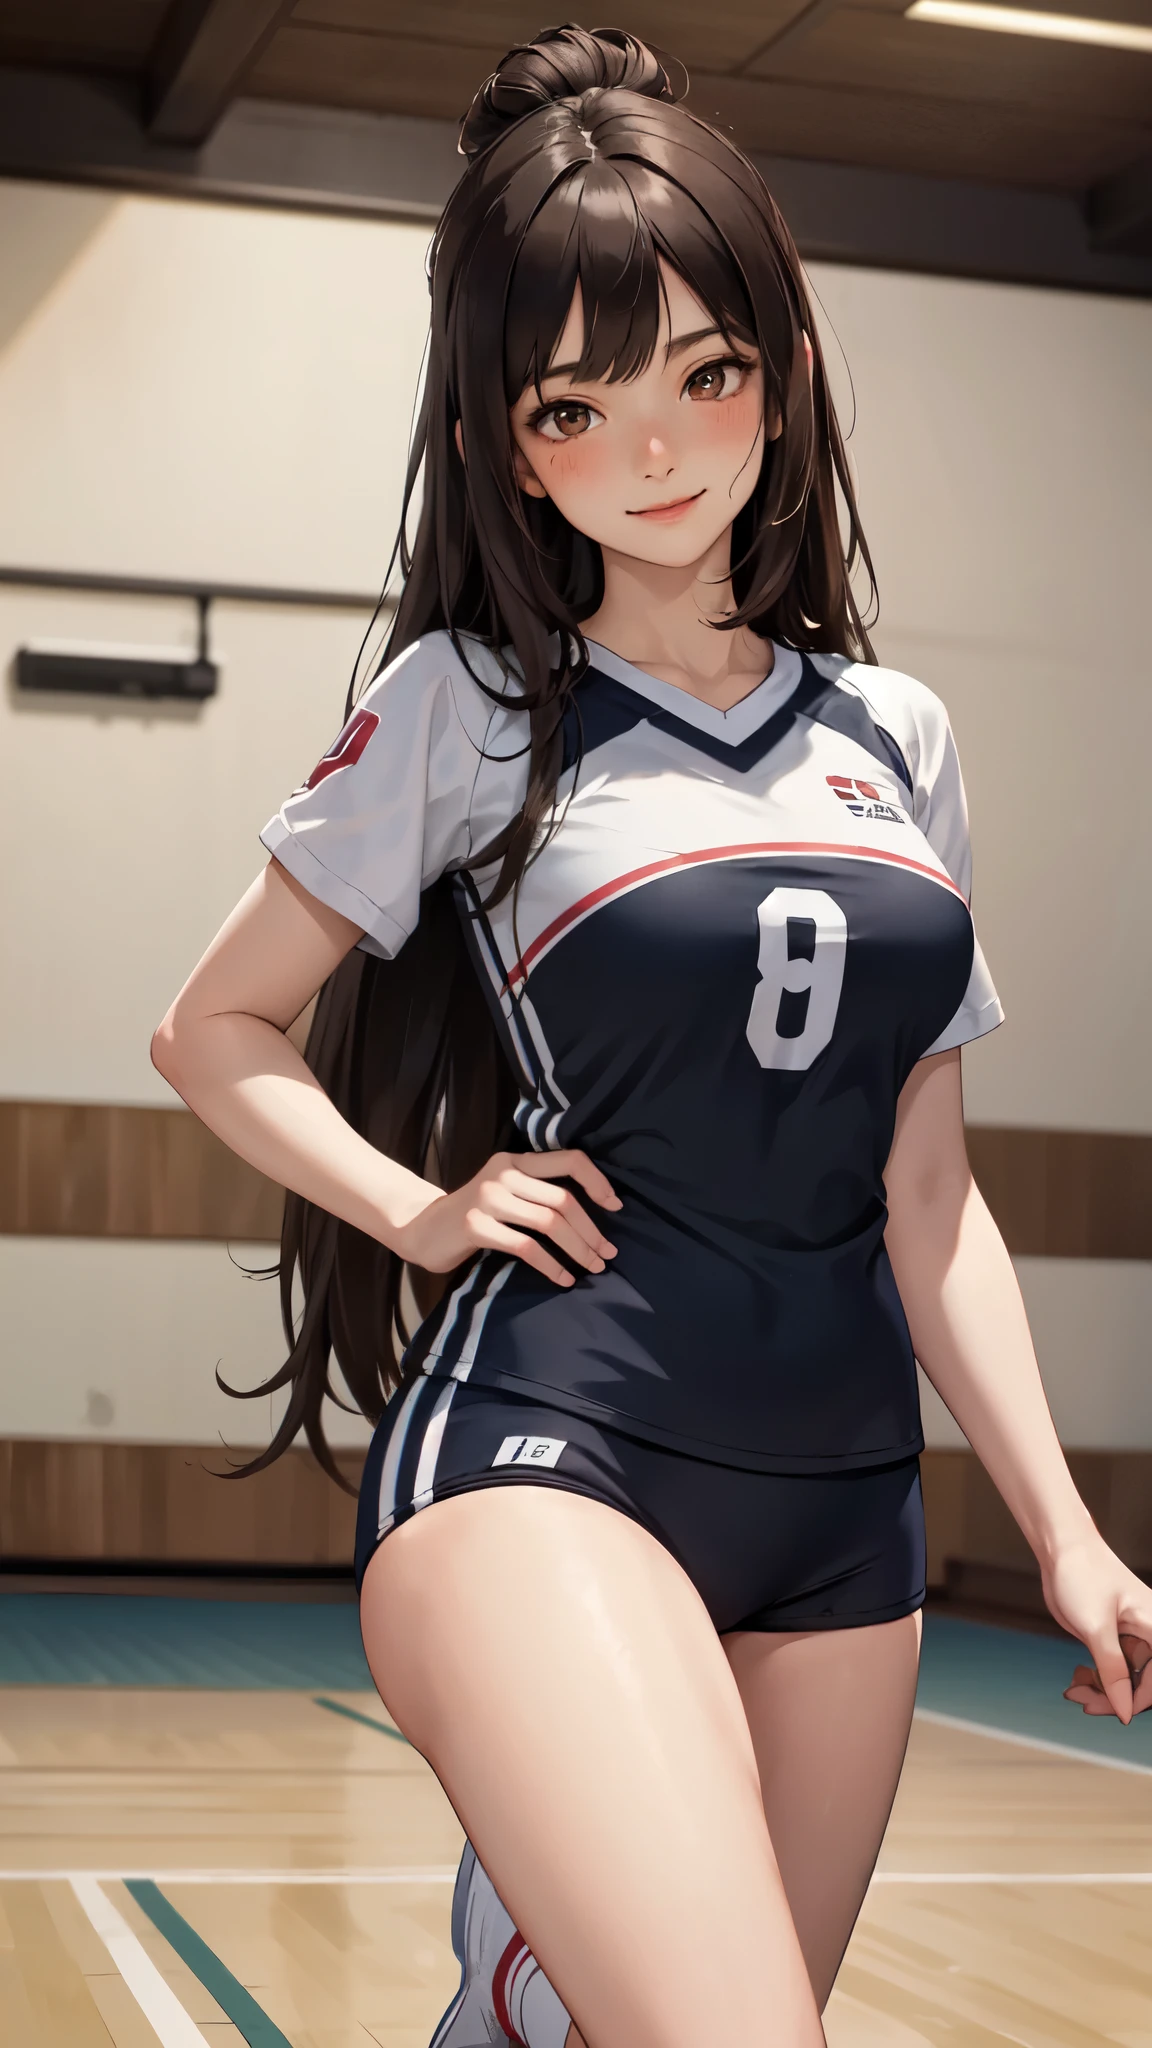 1 lady only, /(volleyball uniform/), /(Dark brown hair/) Bangs, blushing smile, (Masterpiece best quality:1.2) Exquisite illustrations and super detailed, rest /(Indoor volleyball court/)